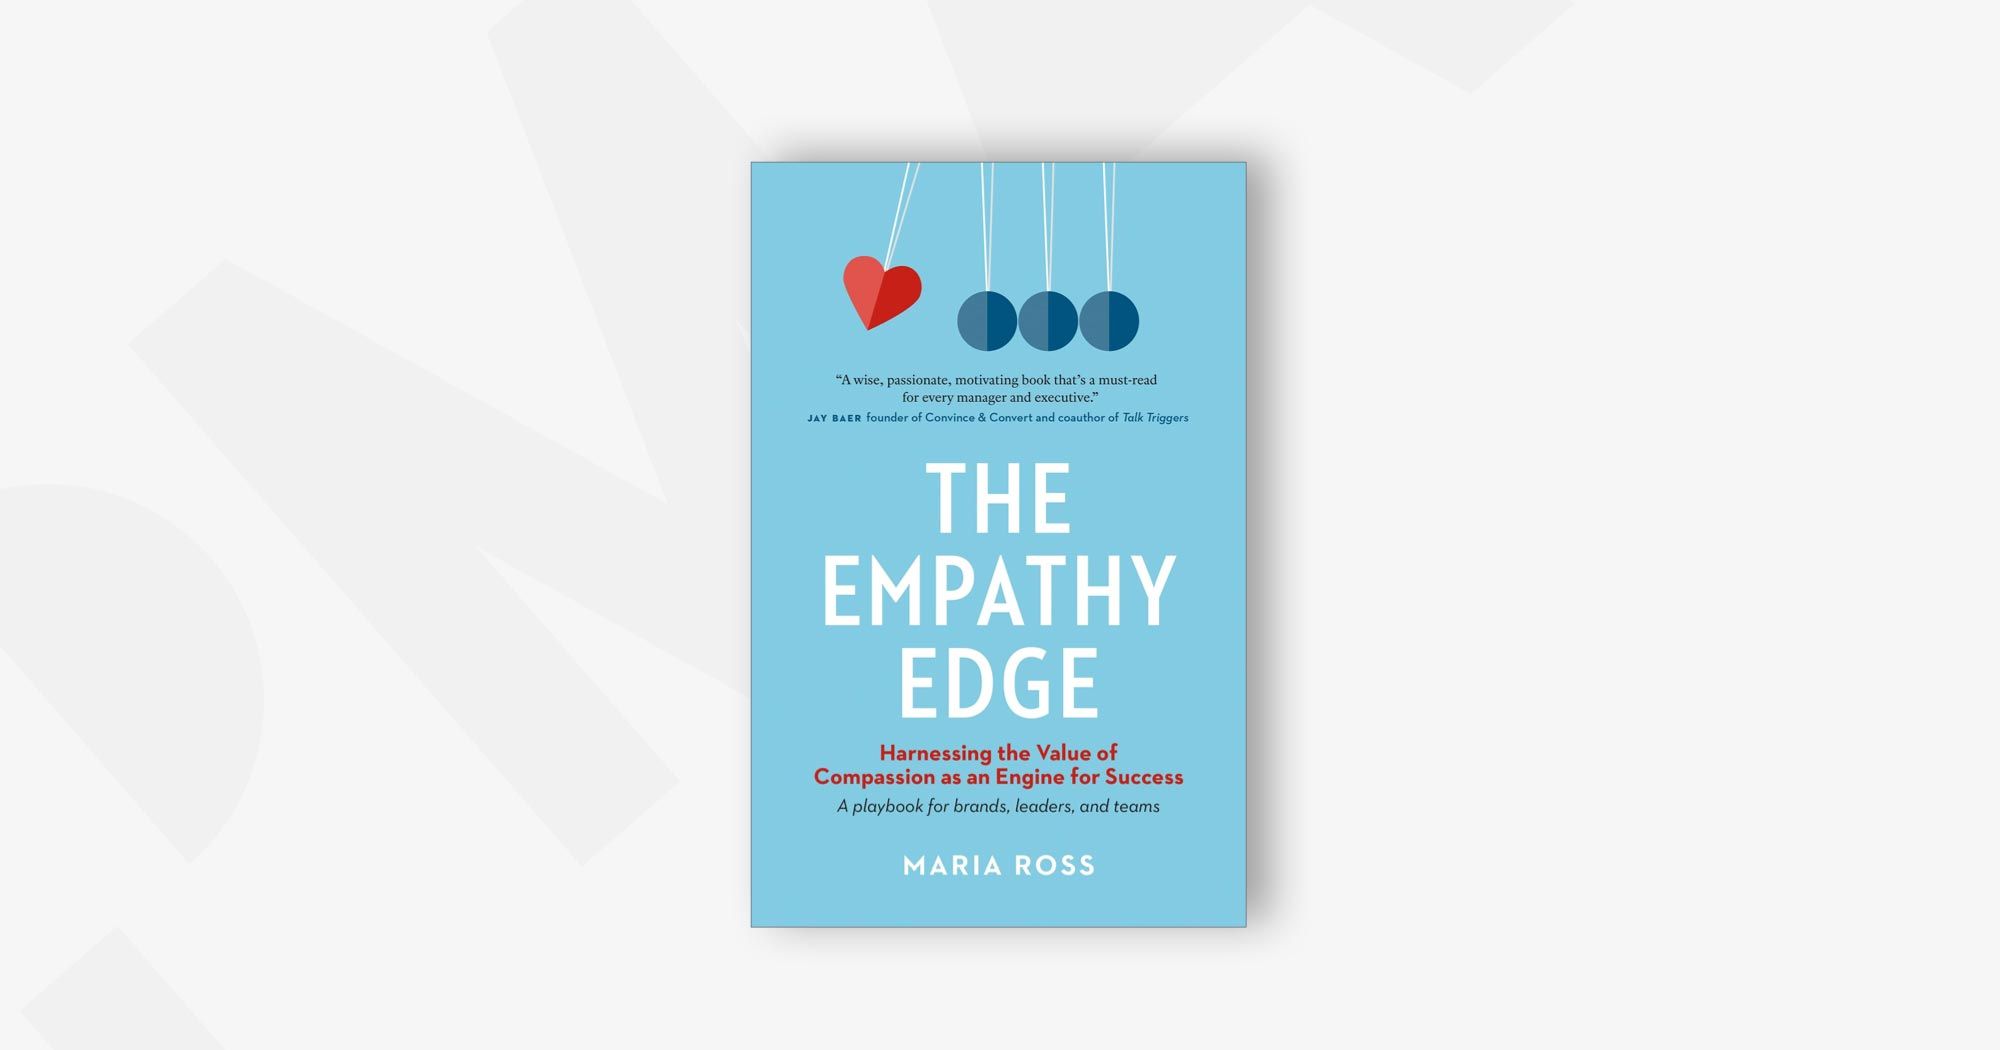 The Empathy Edge: Harnessing the Value of Compassion as an Engine for Success – Maria Ross